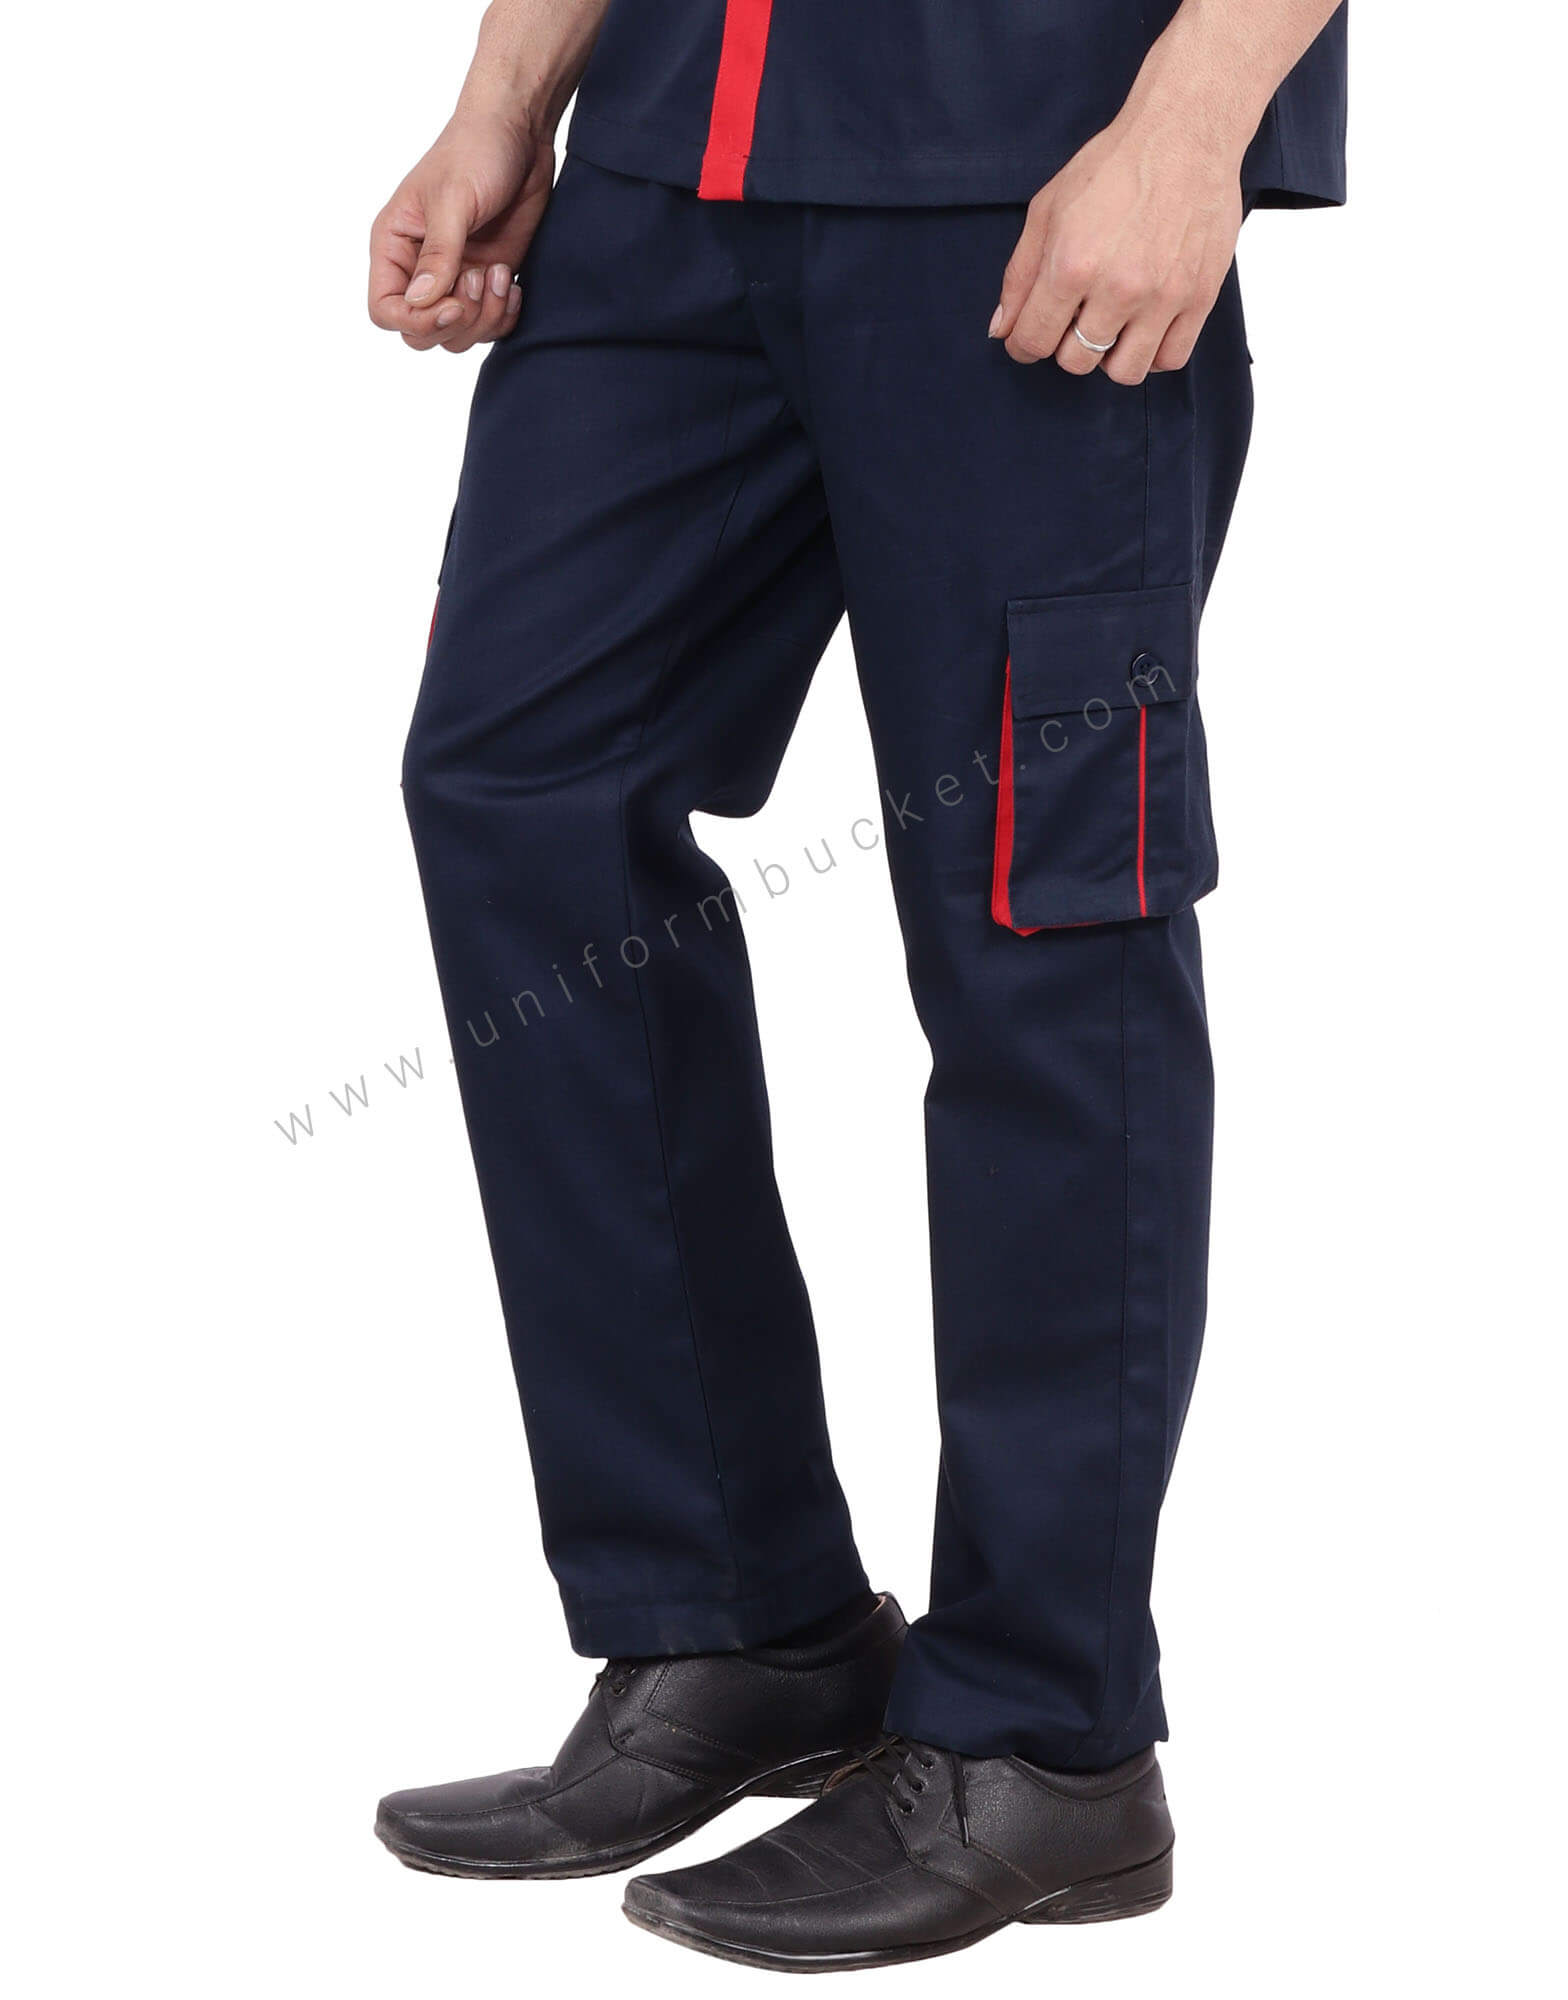 Grand Le Mar | Navy Flannel Gurkha Trousers Refined Comfort and Style.